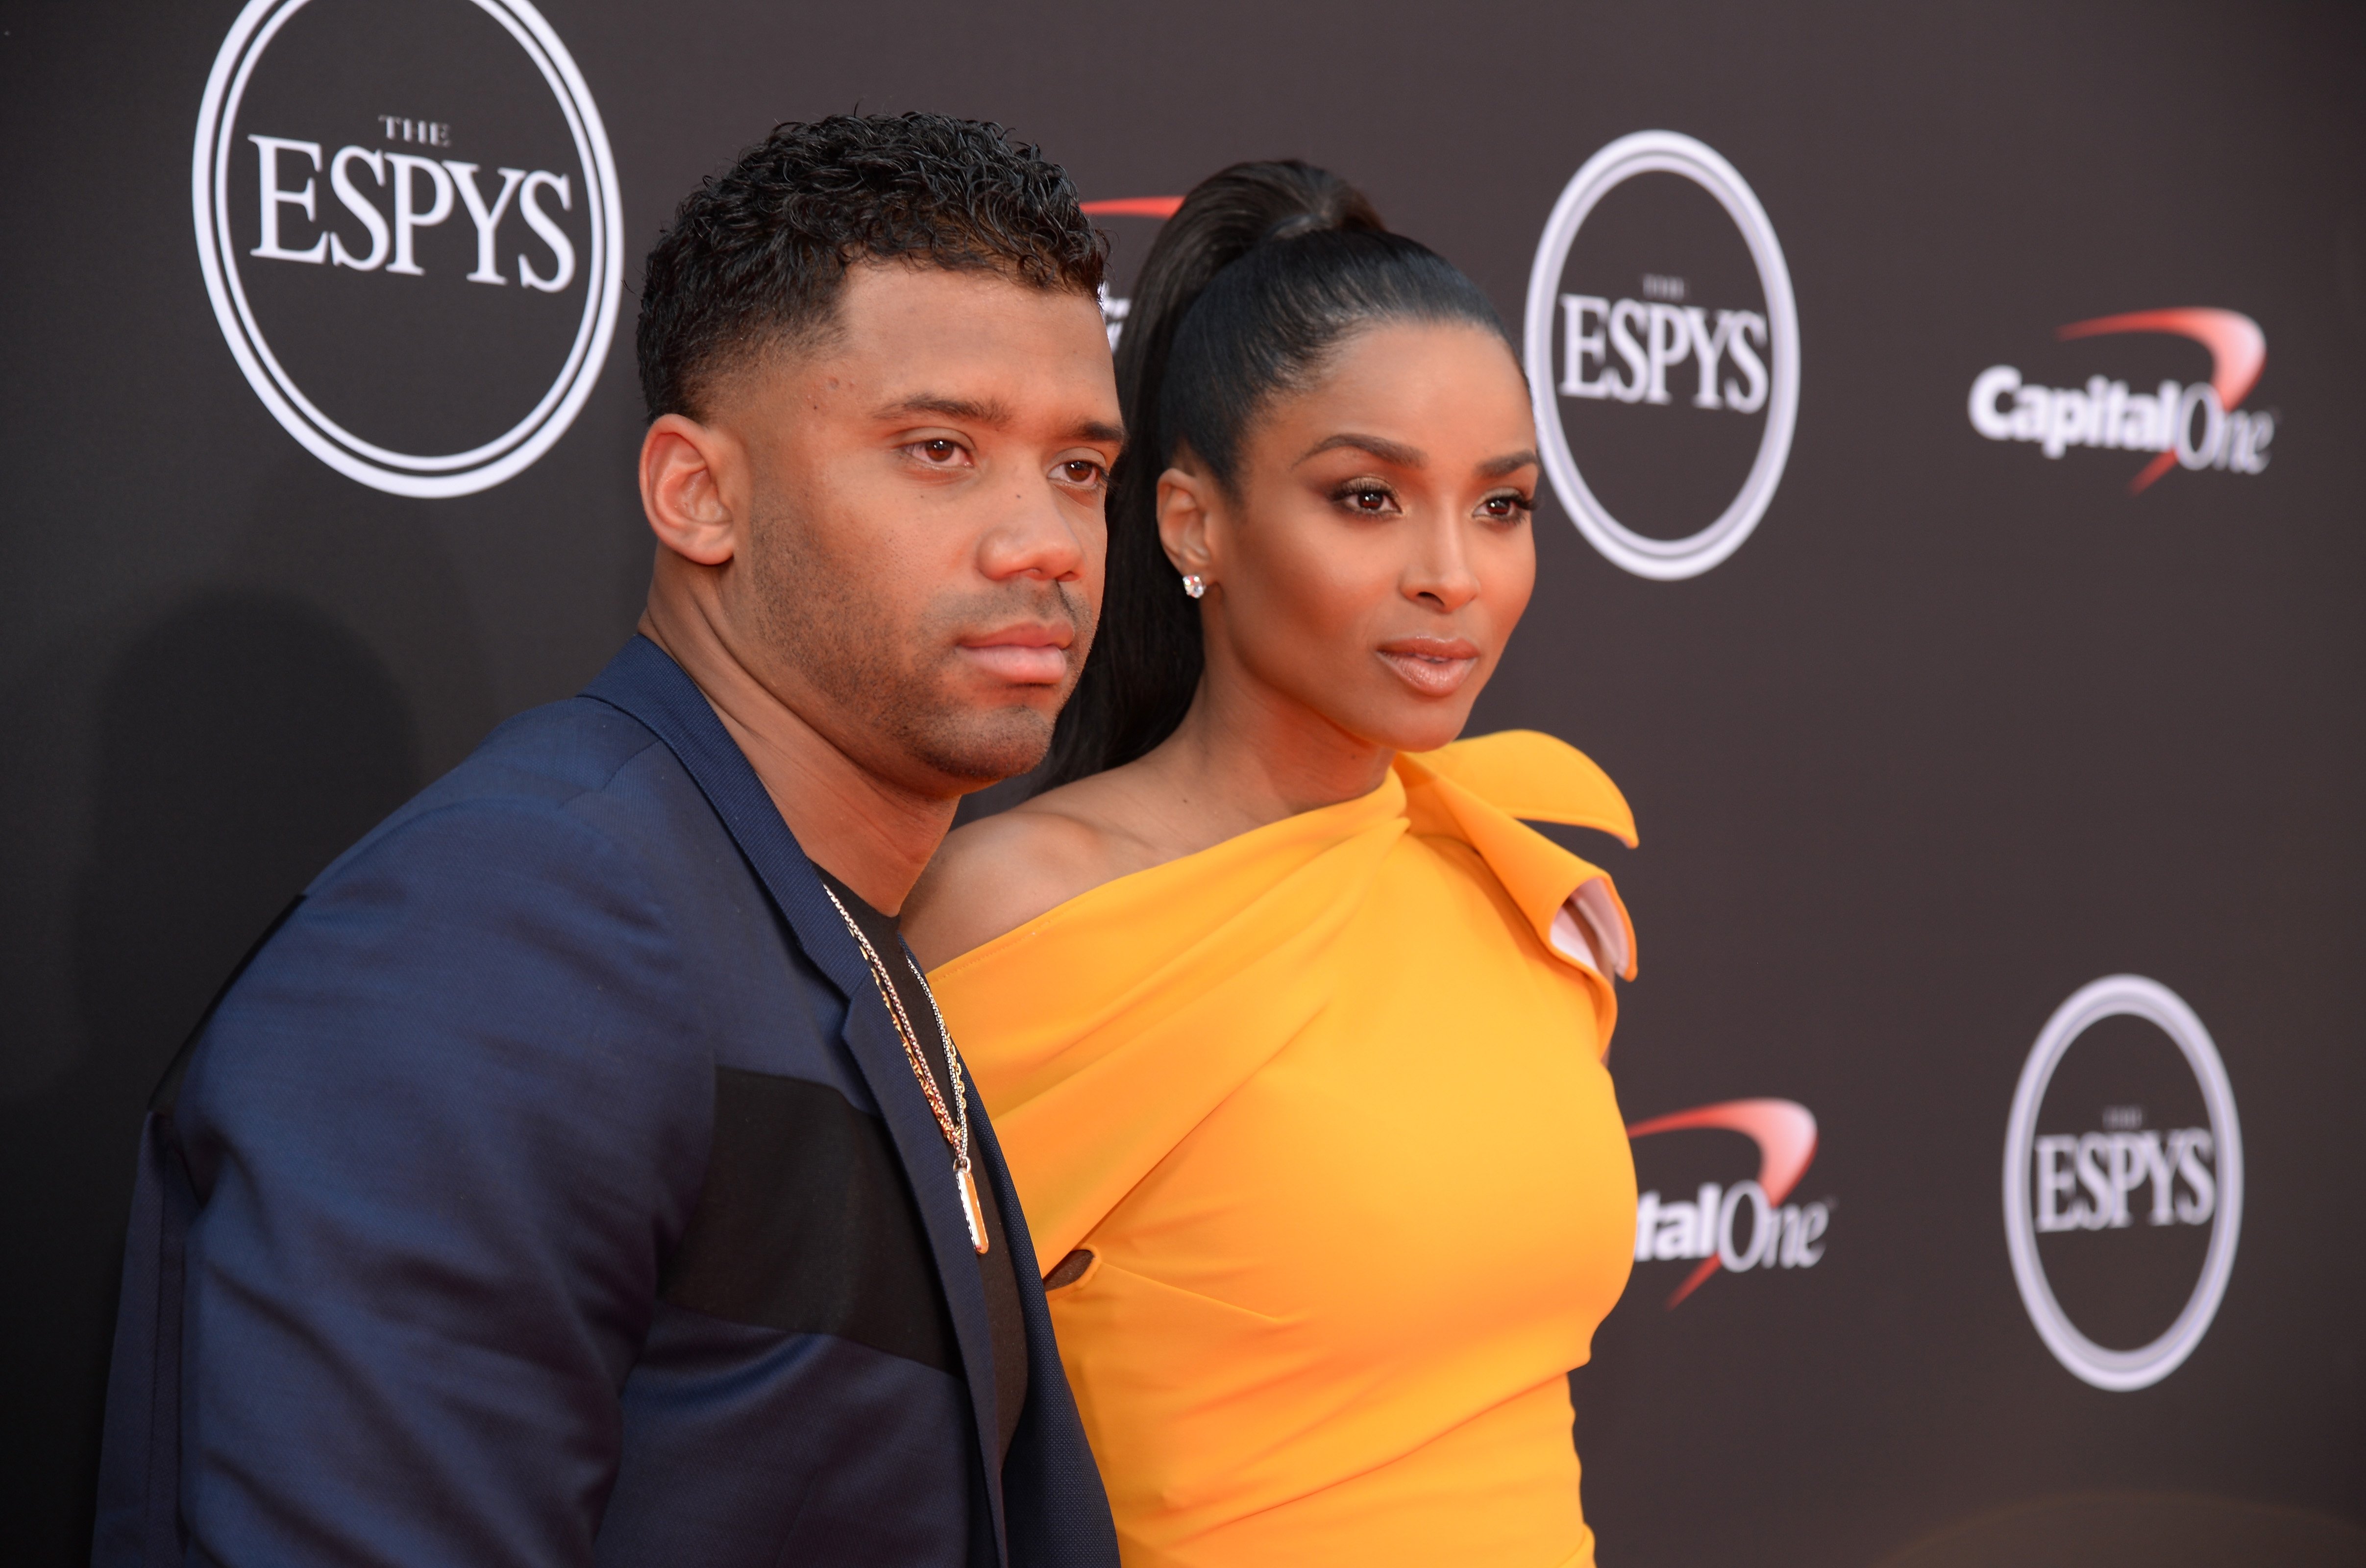 Ciara & Russell Wilson at The 2018 ESPYS in Los Angeles, California on July 18, 2018. | Photo: Getty Images